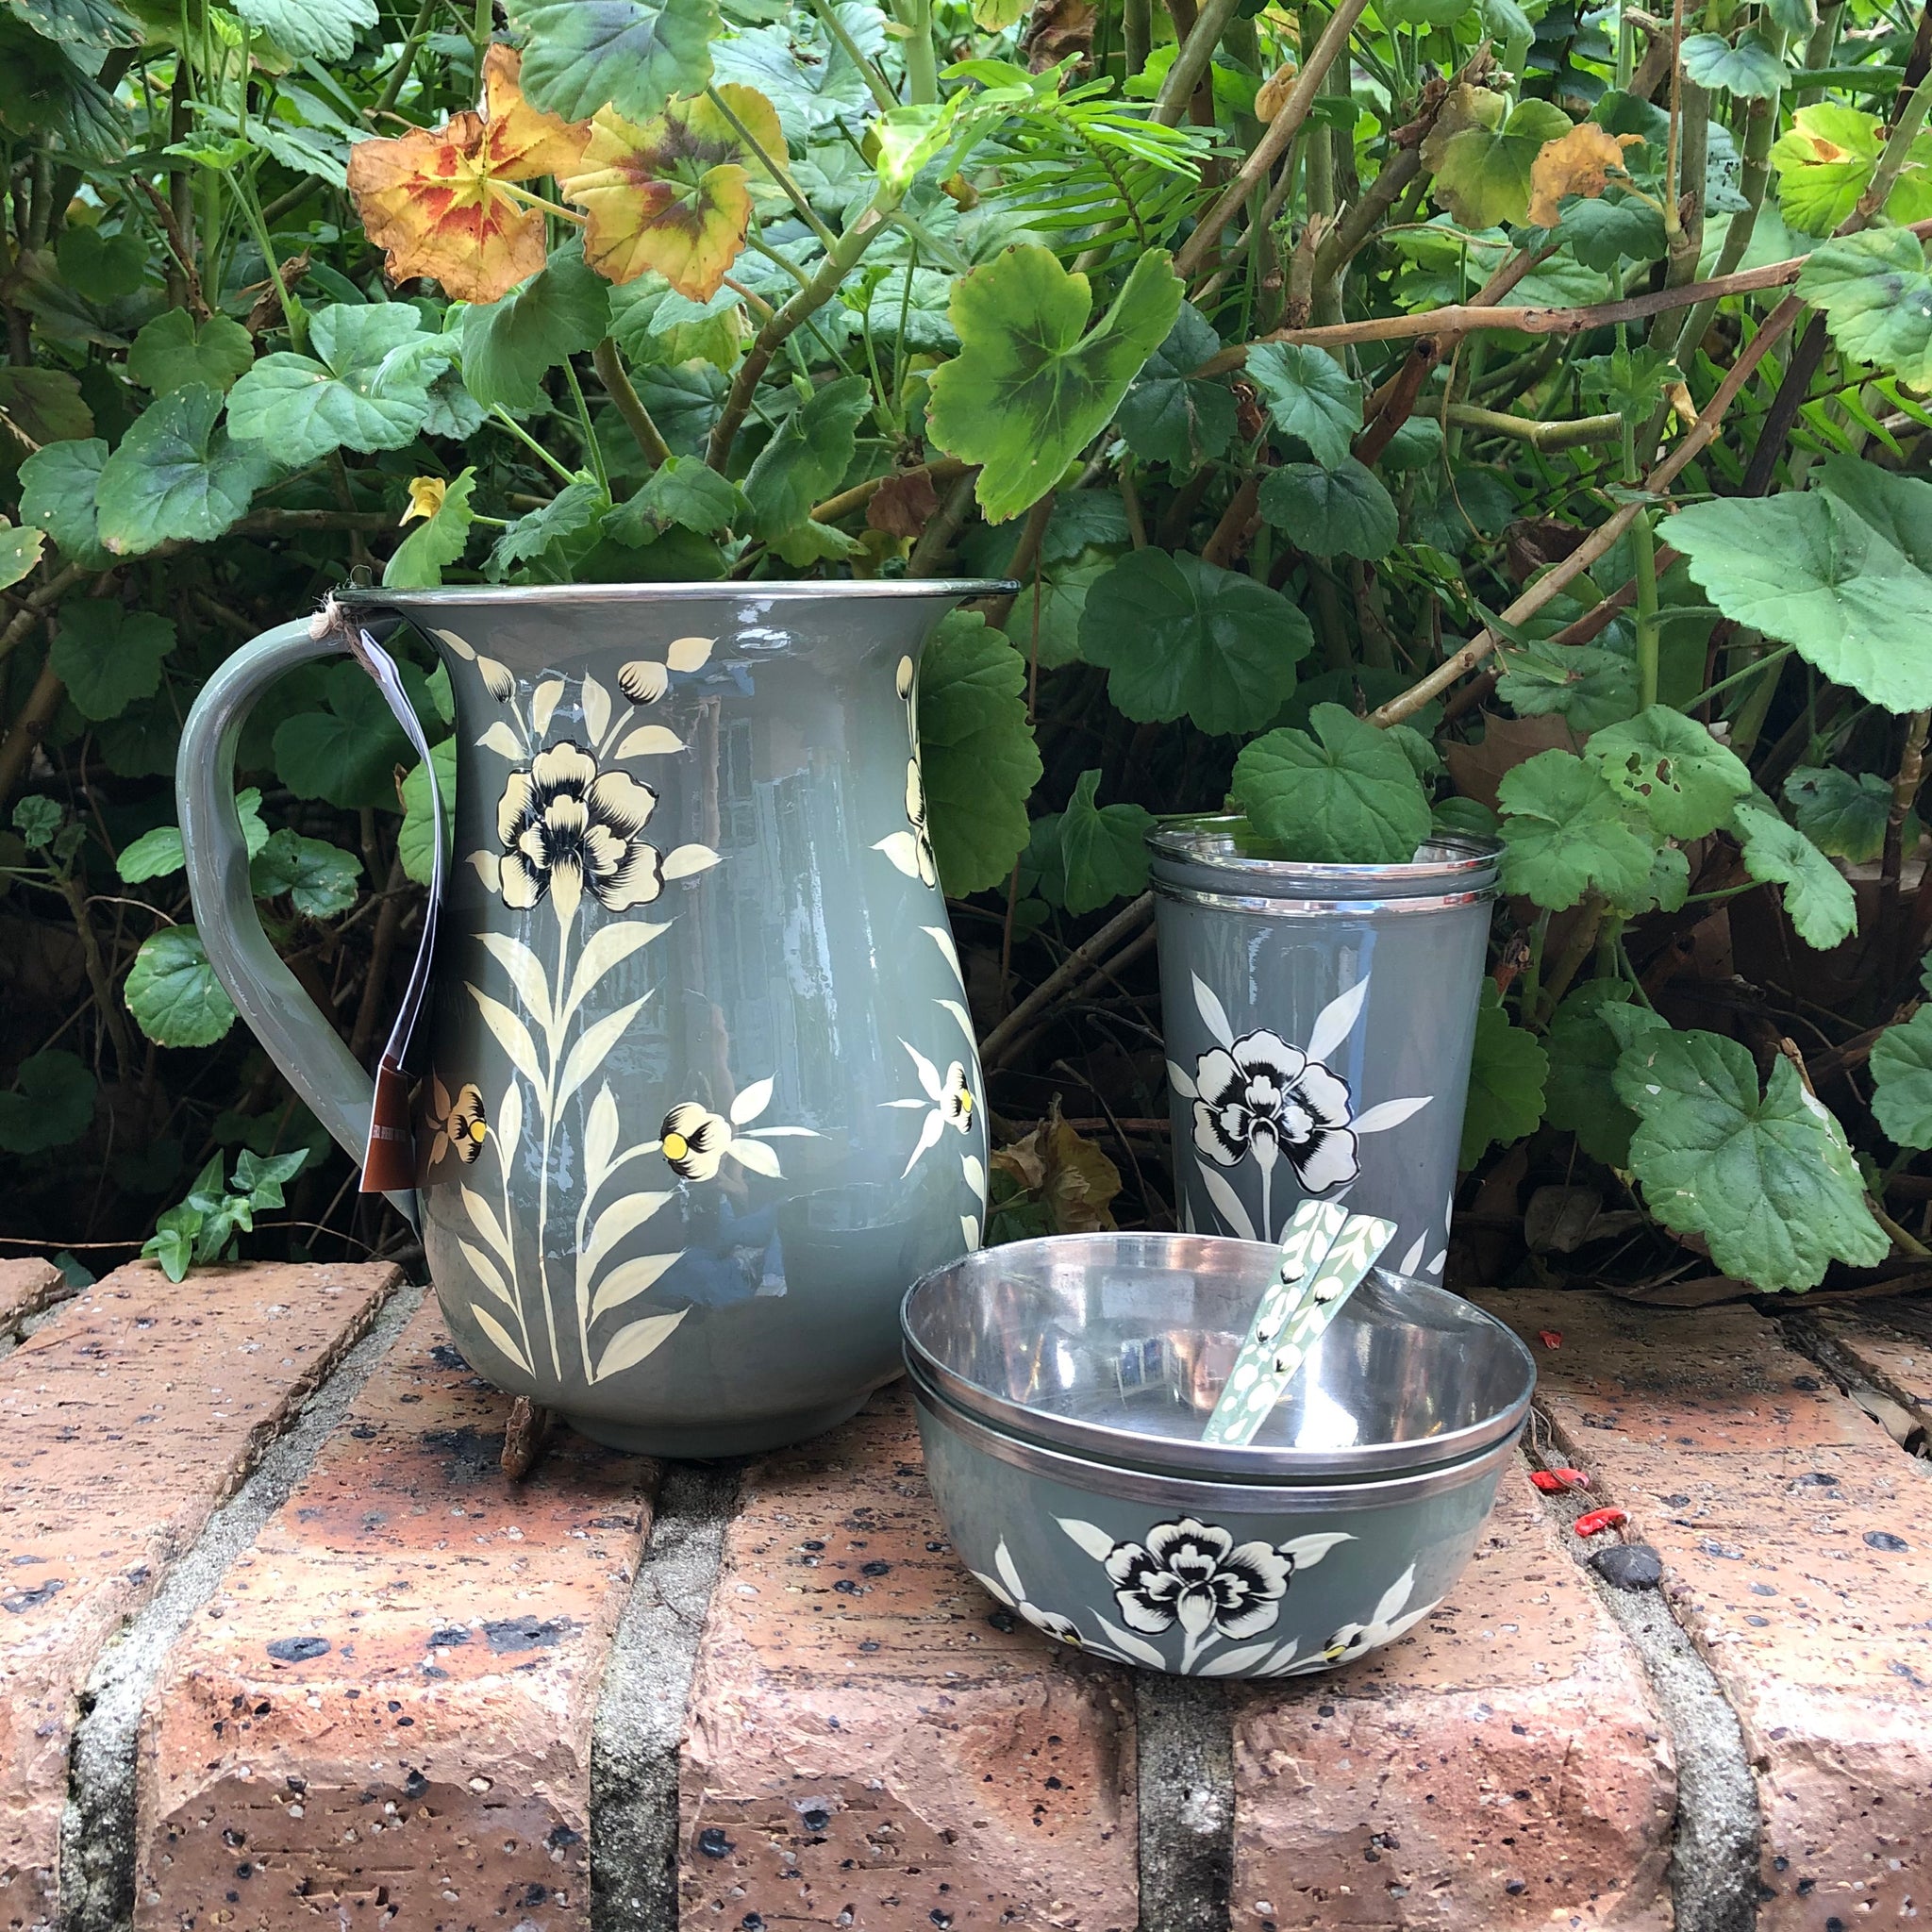 Grey Steel Set, photo includes the jug, cups, bowl and spoons. each with a grey painted background with white flowers on white stems around the circumference of each object.  